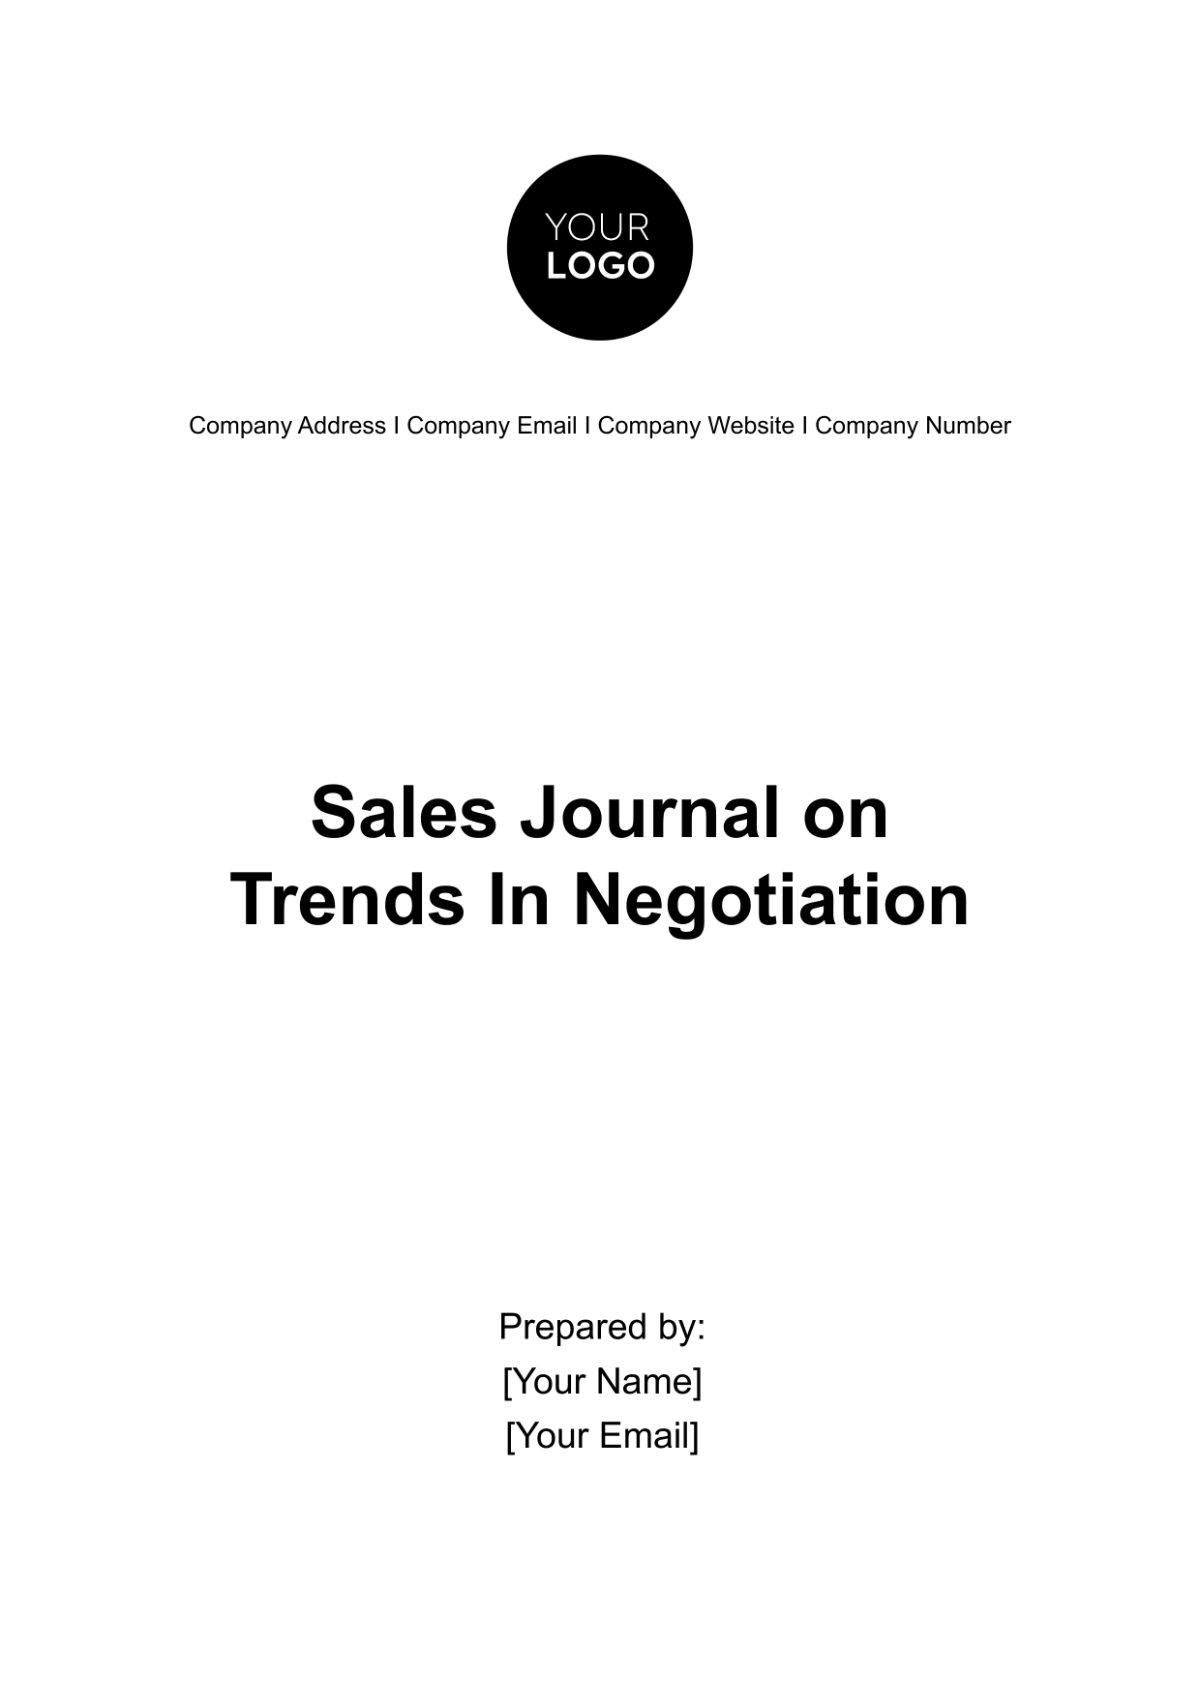 Sales Journal on Trends in Negotiation Template